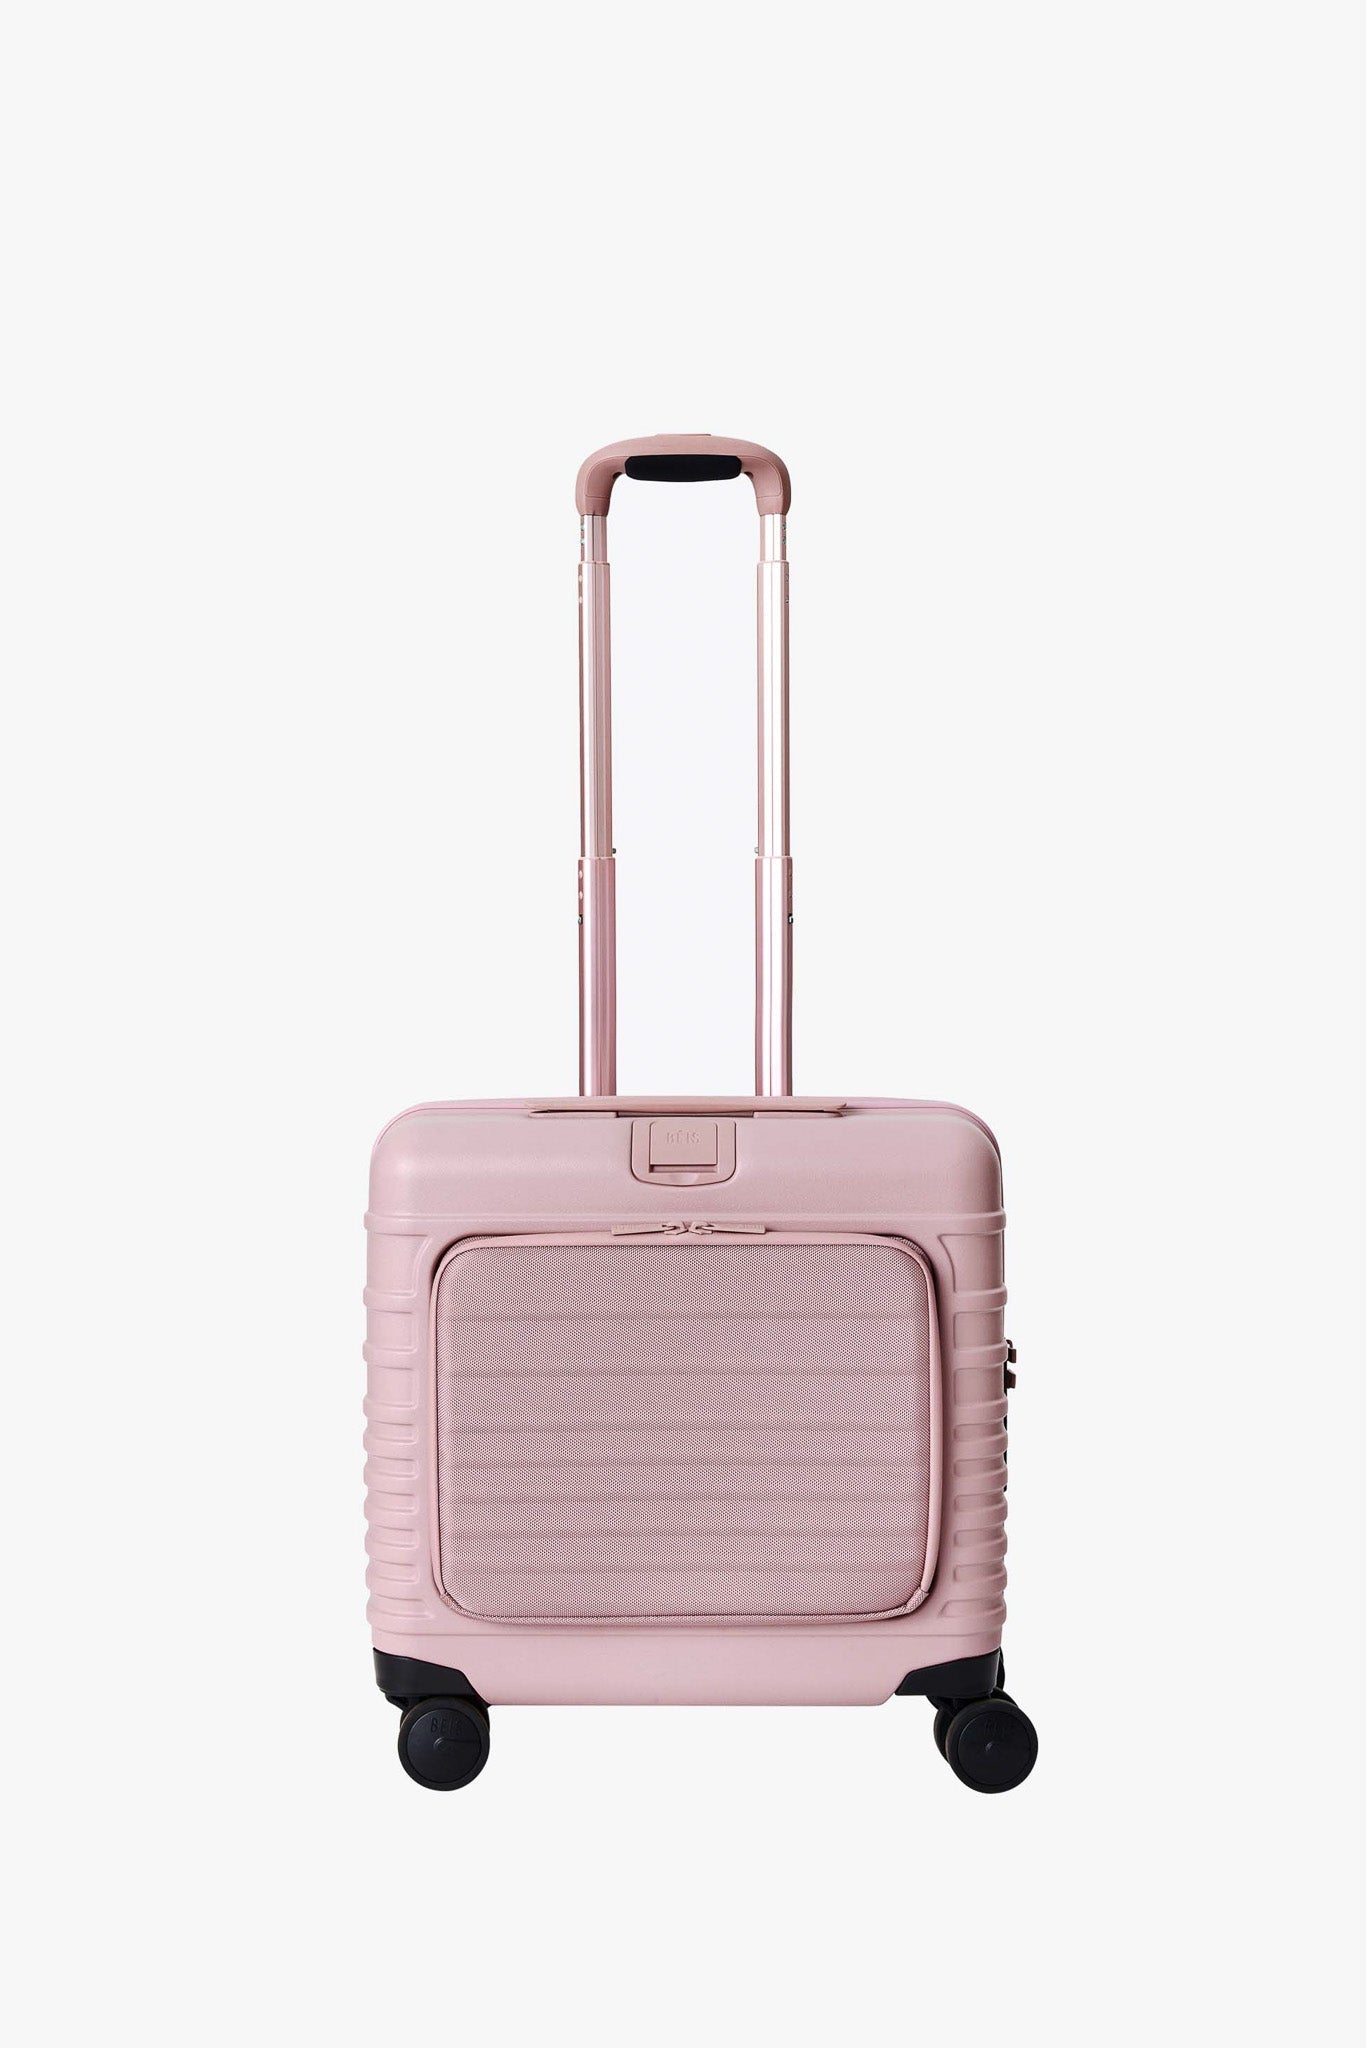 Family Luggage & Bags